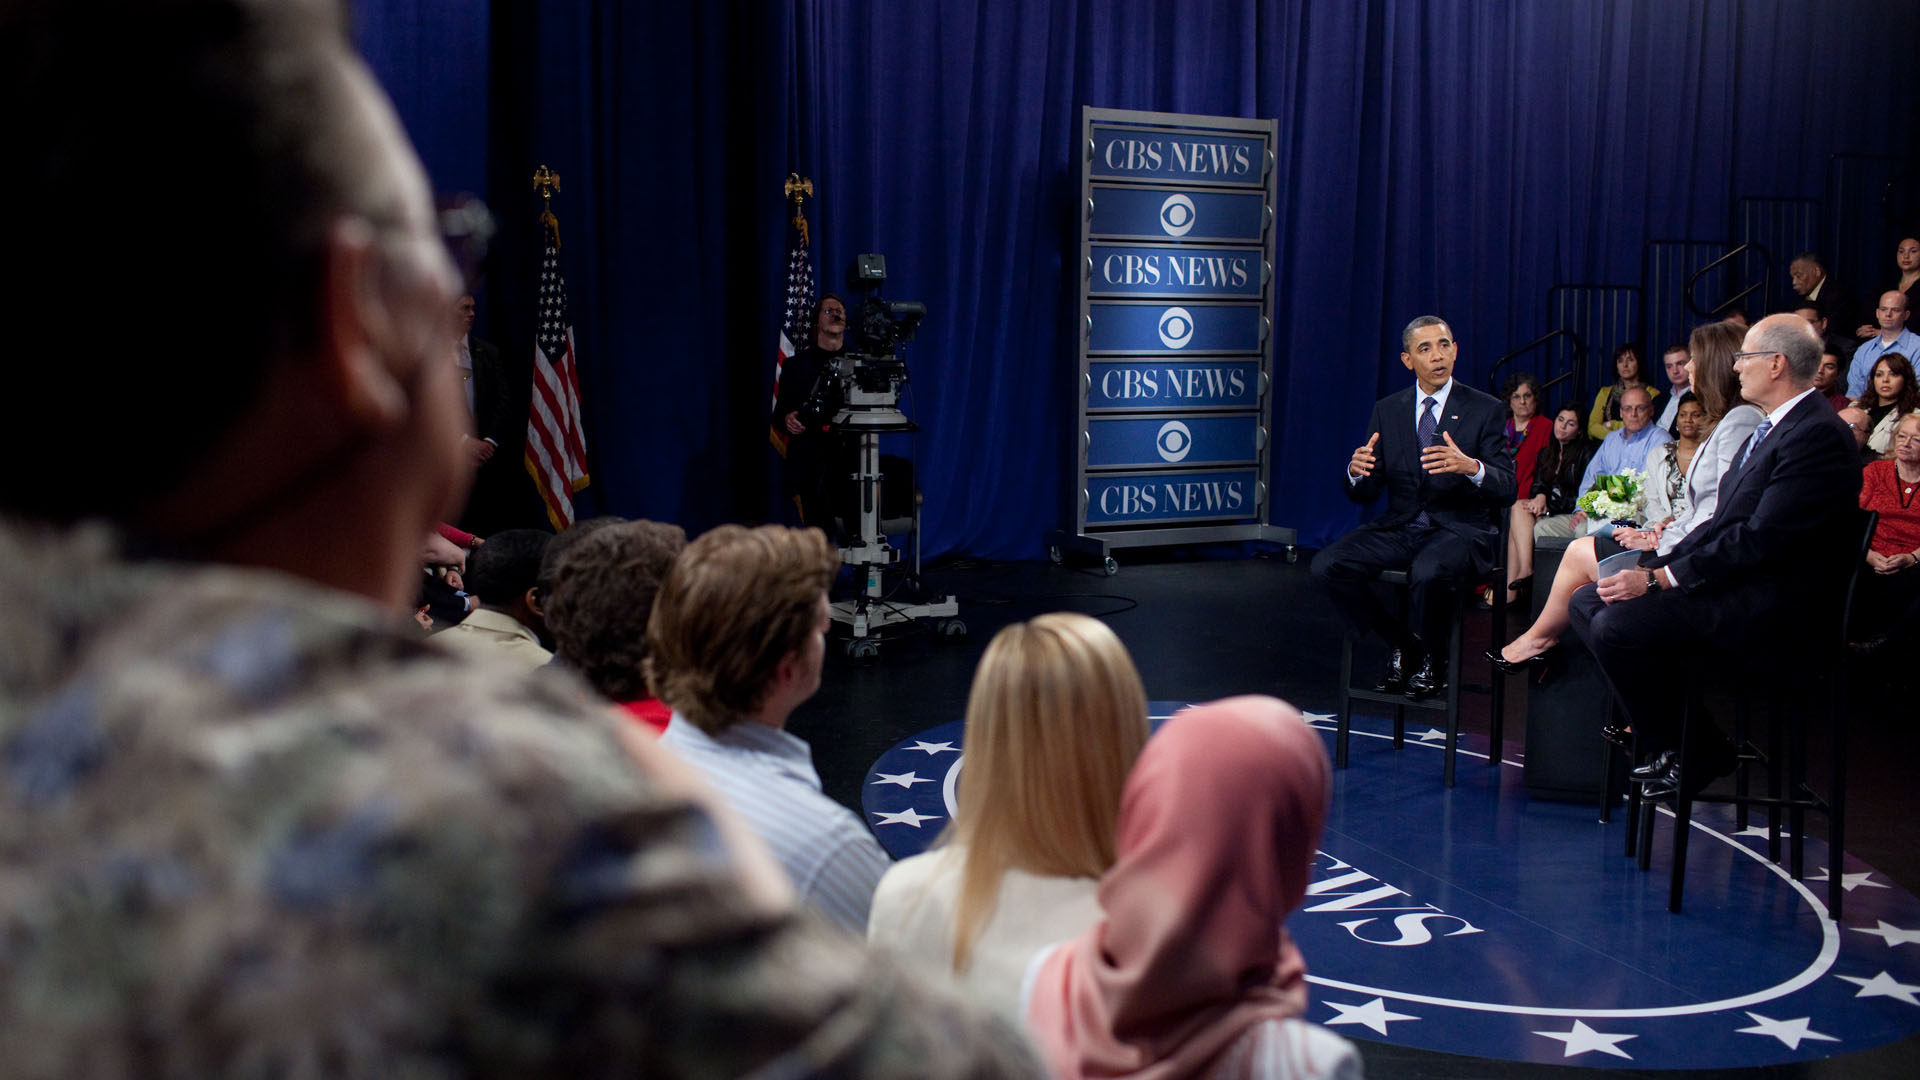 President Barack Obama Responds to a Question at a CBS News Townhall Meeting on the Economy